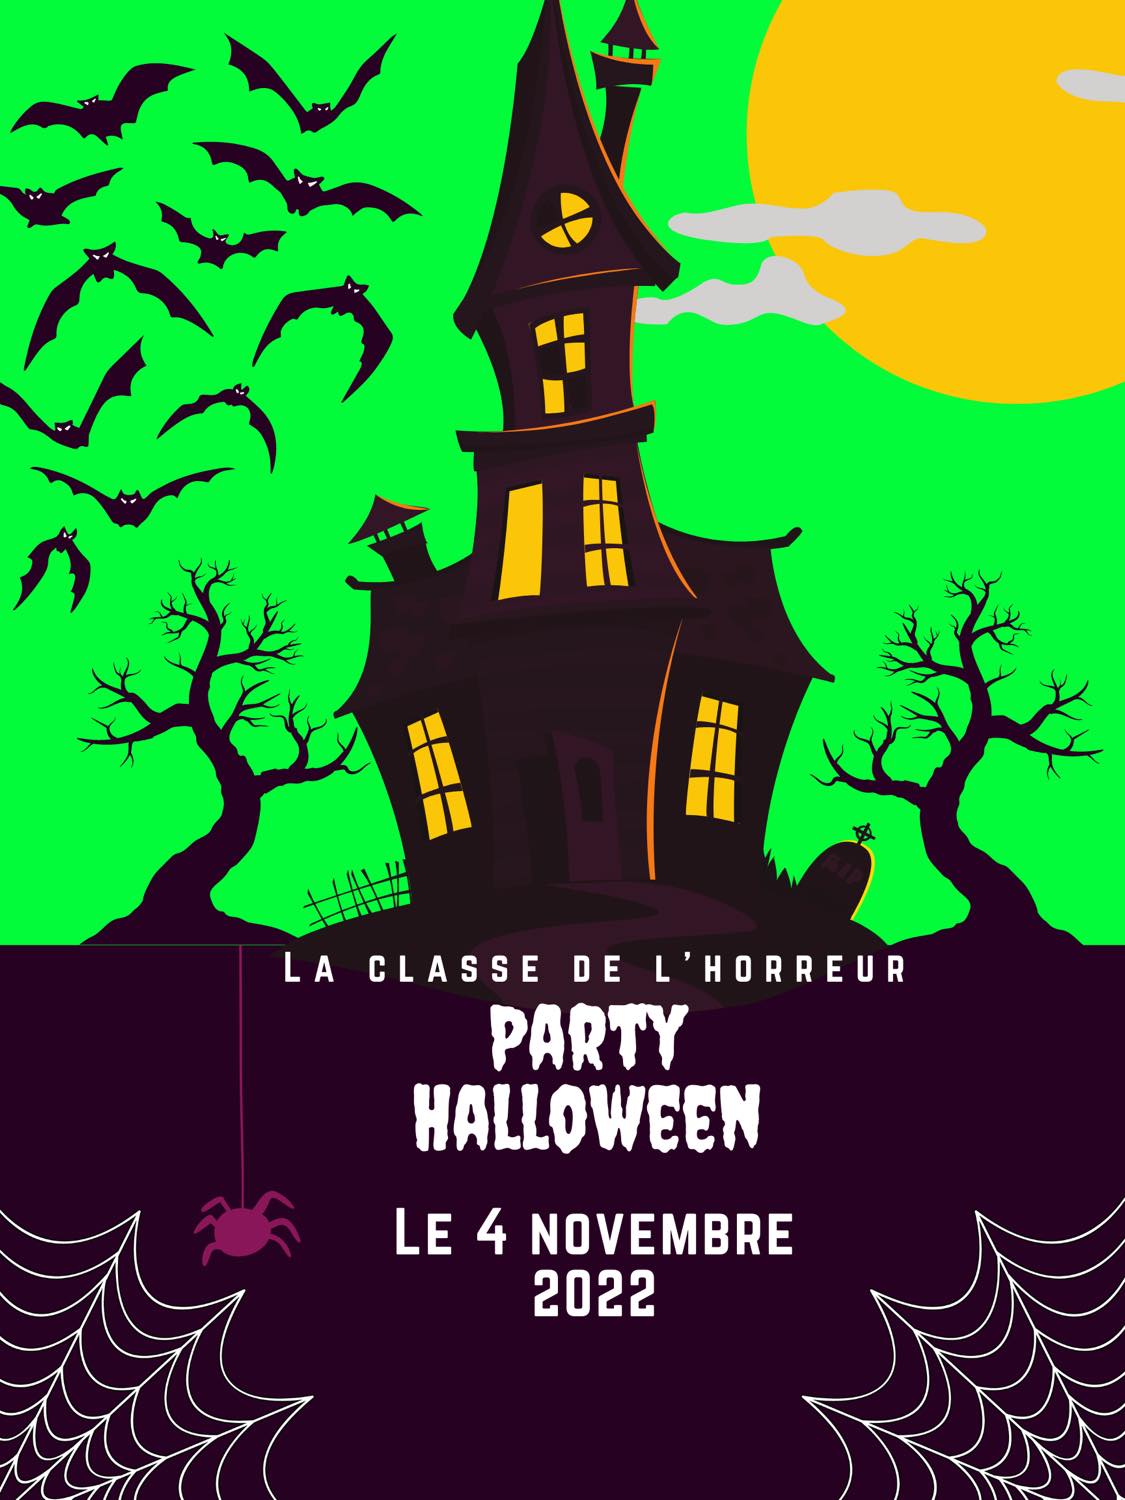 2022 lanaudiere party halloween